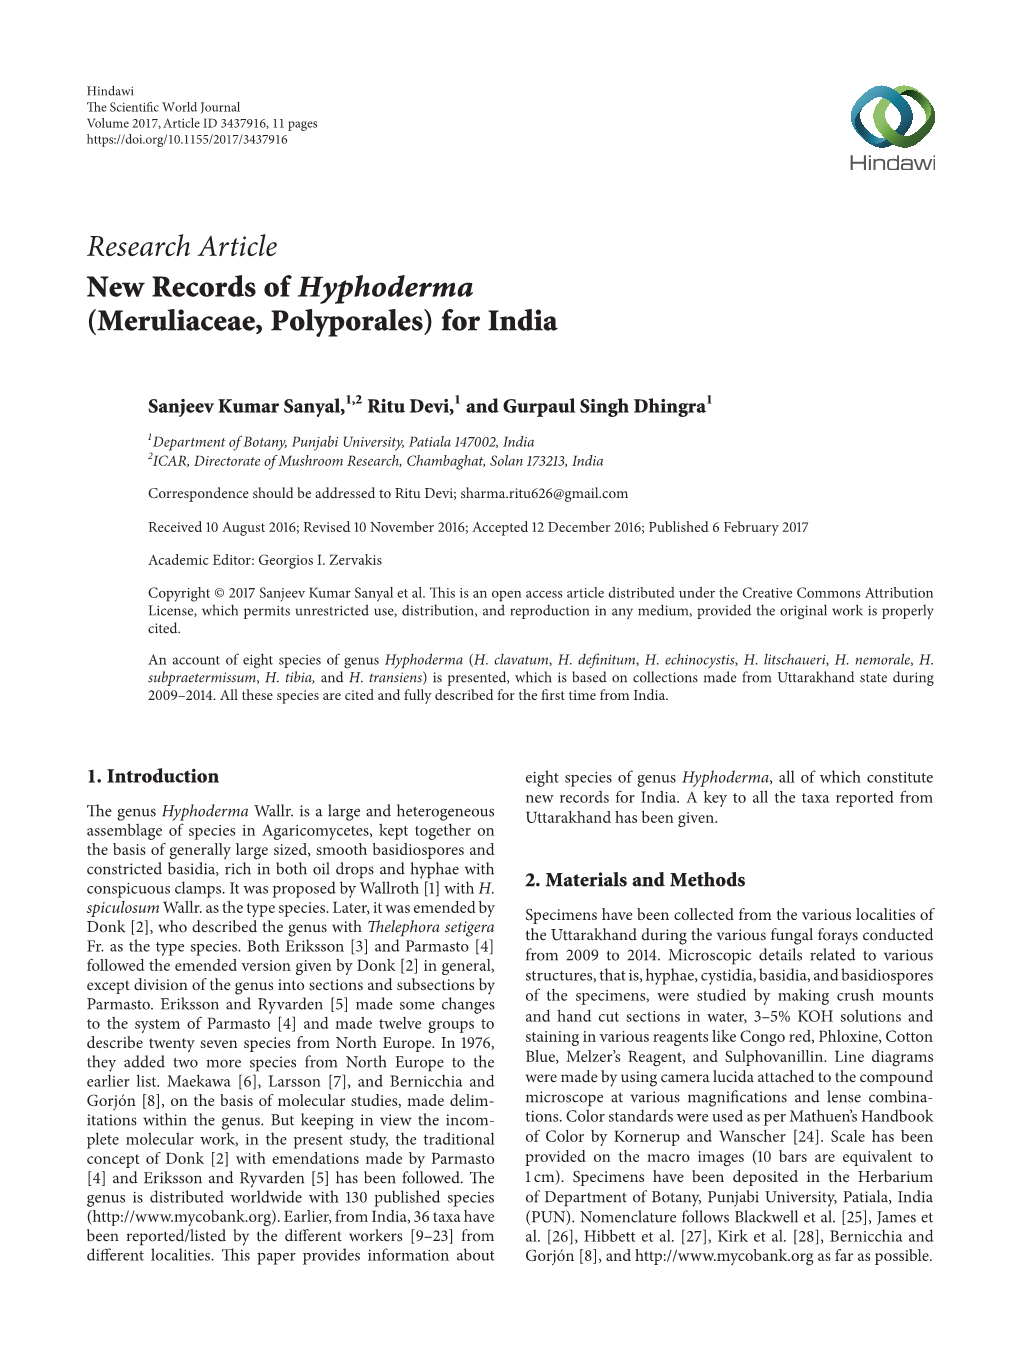 New Records of Hyphoderma (Meruliaceae, Polyporales) for India